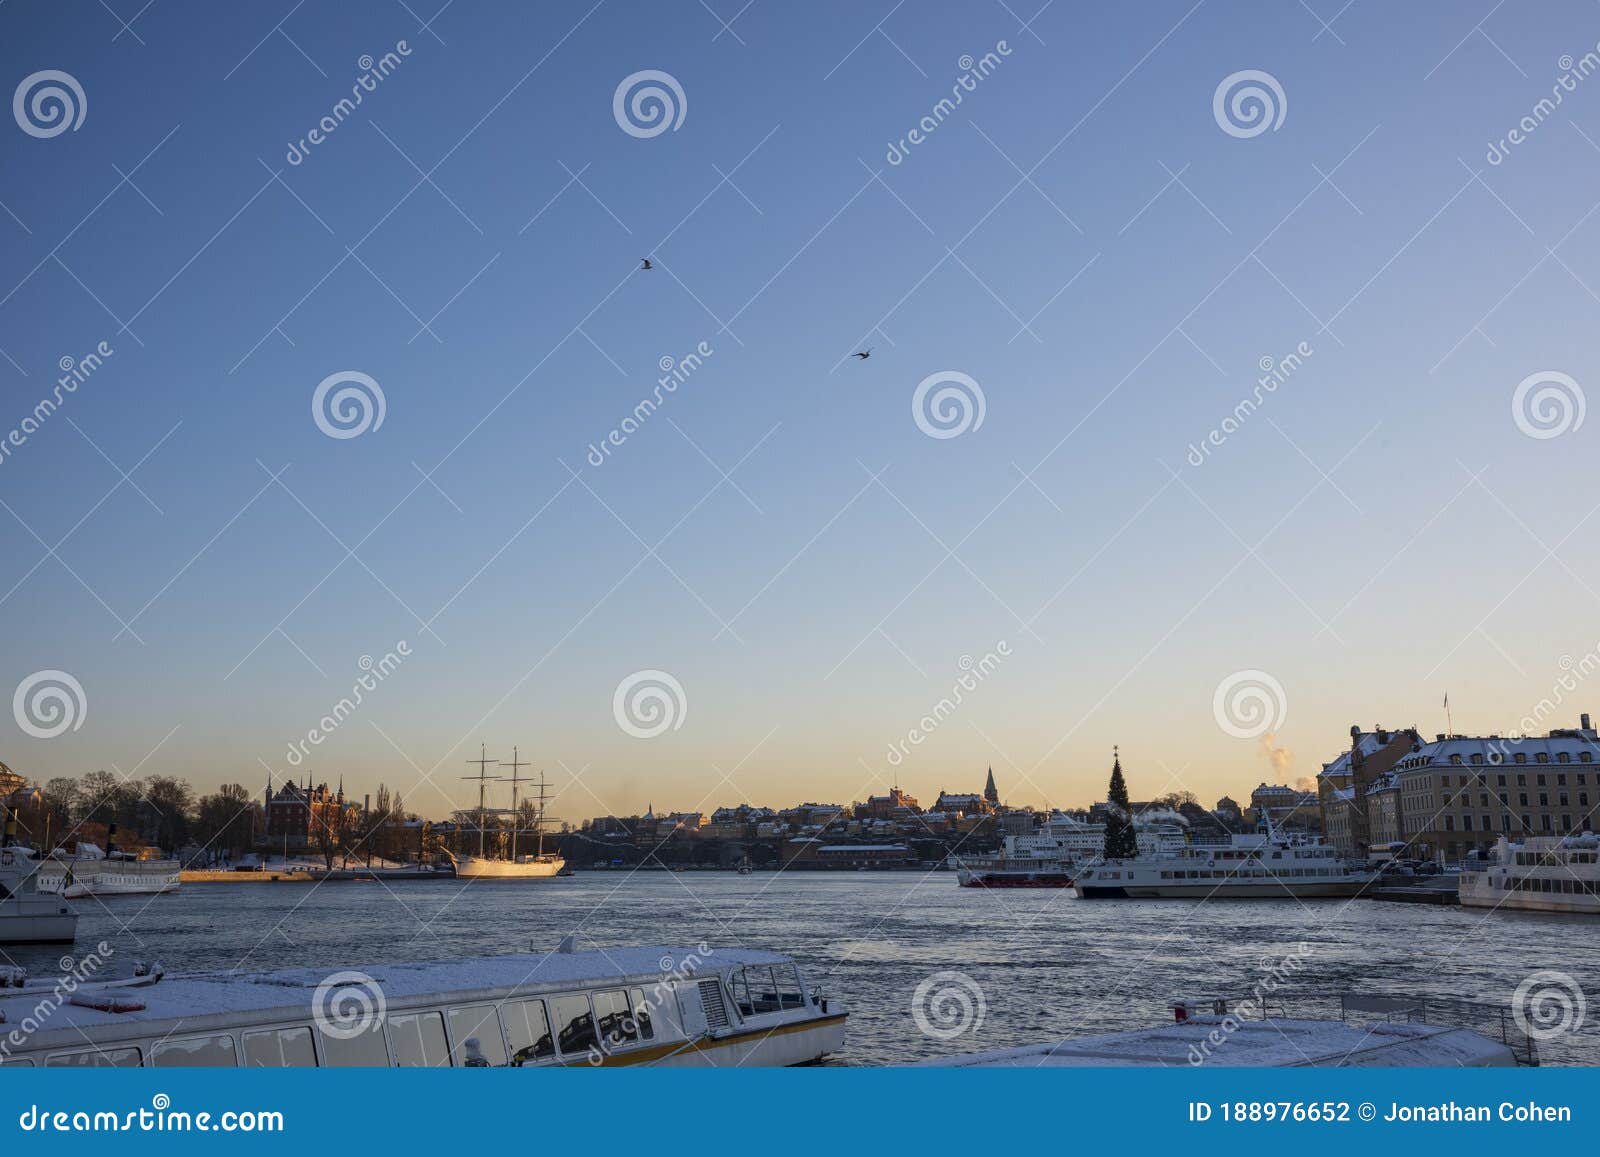 Snow Covered Water Taxis Docked Along a Harbor Stock Photo - Image of ...